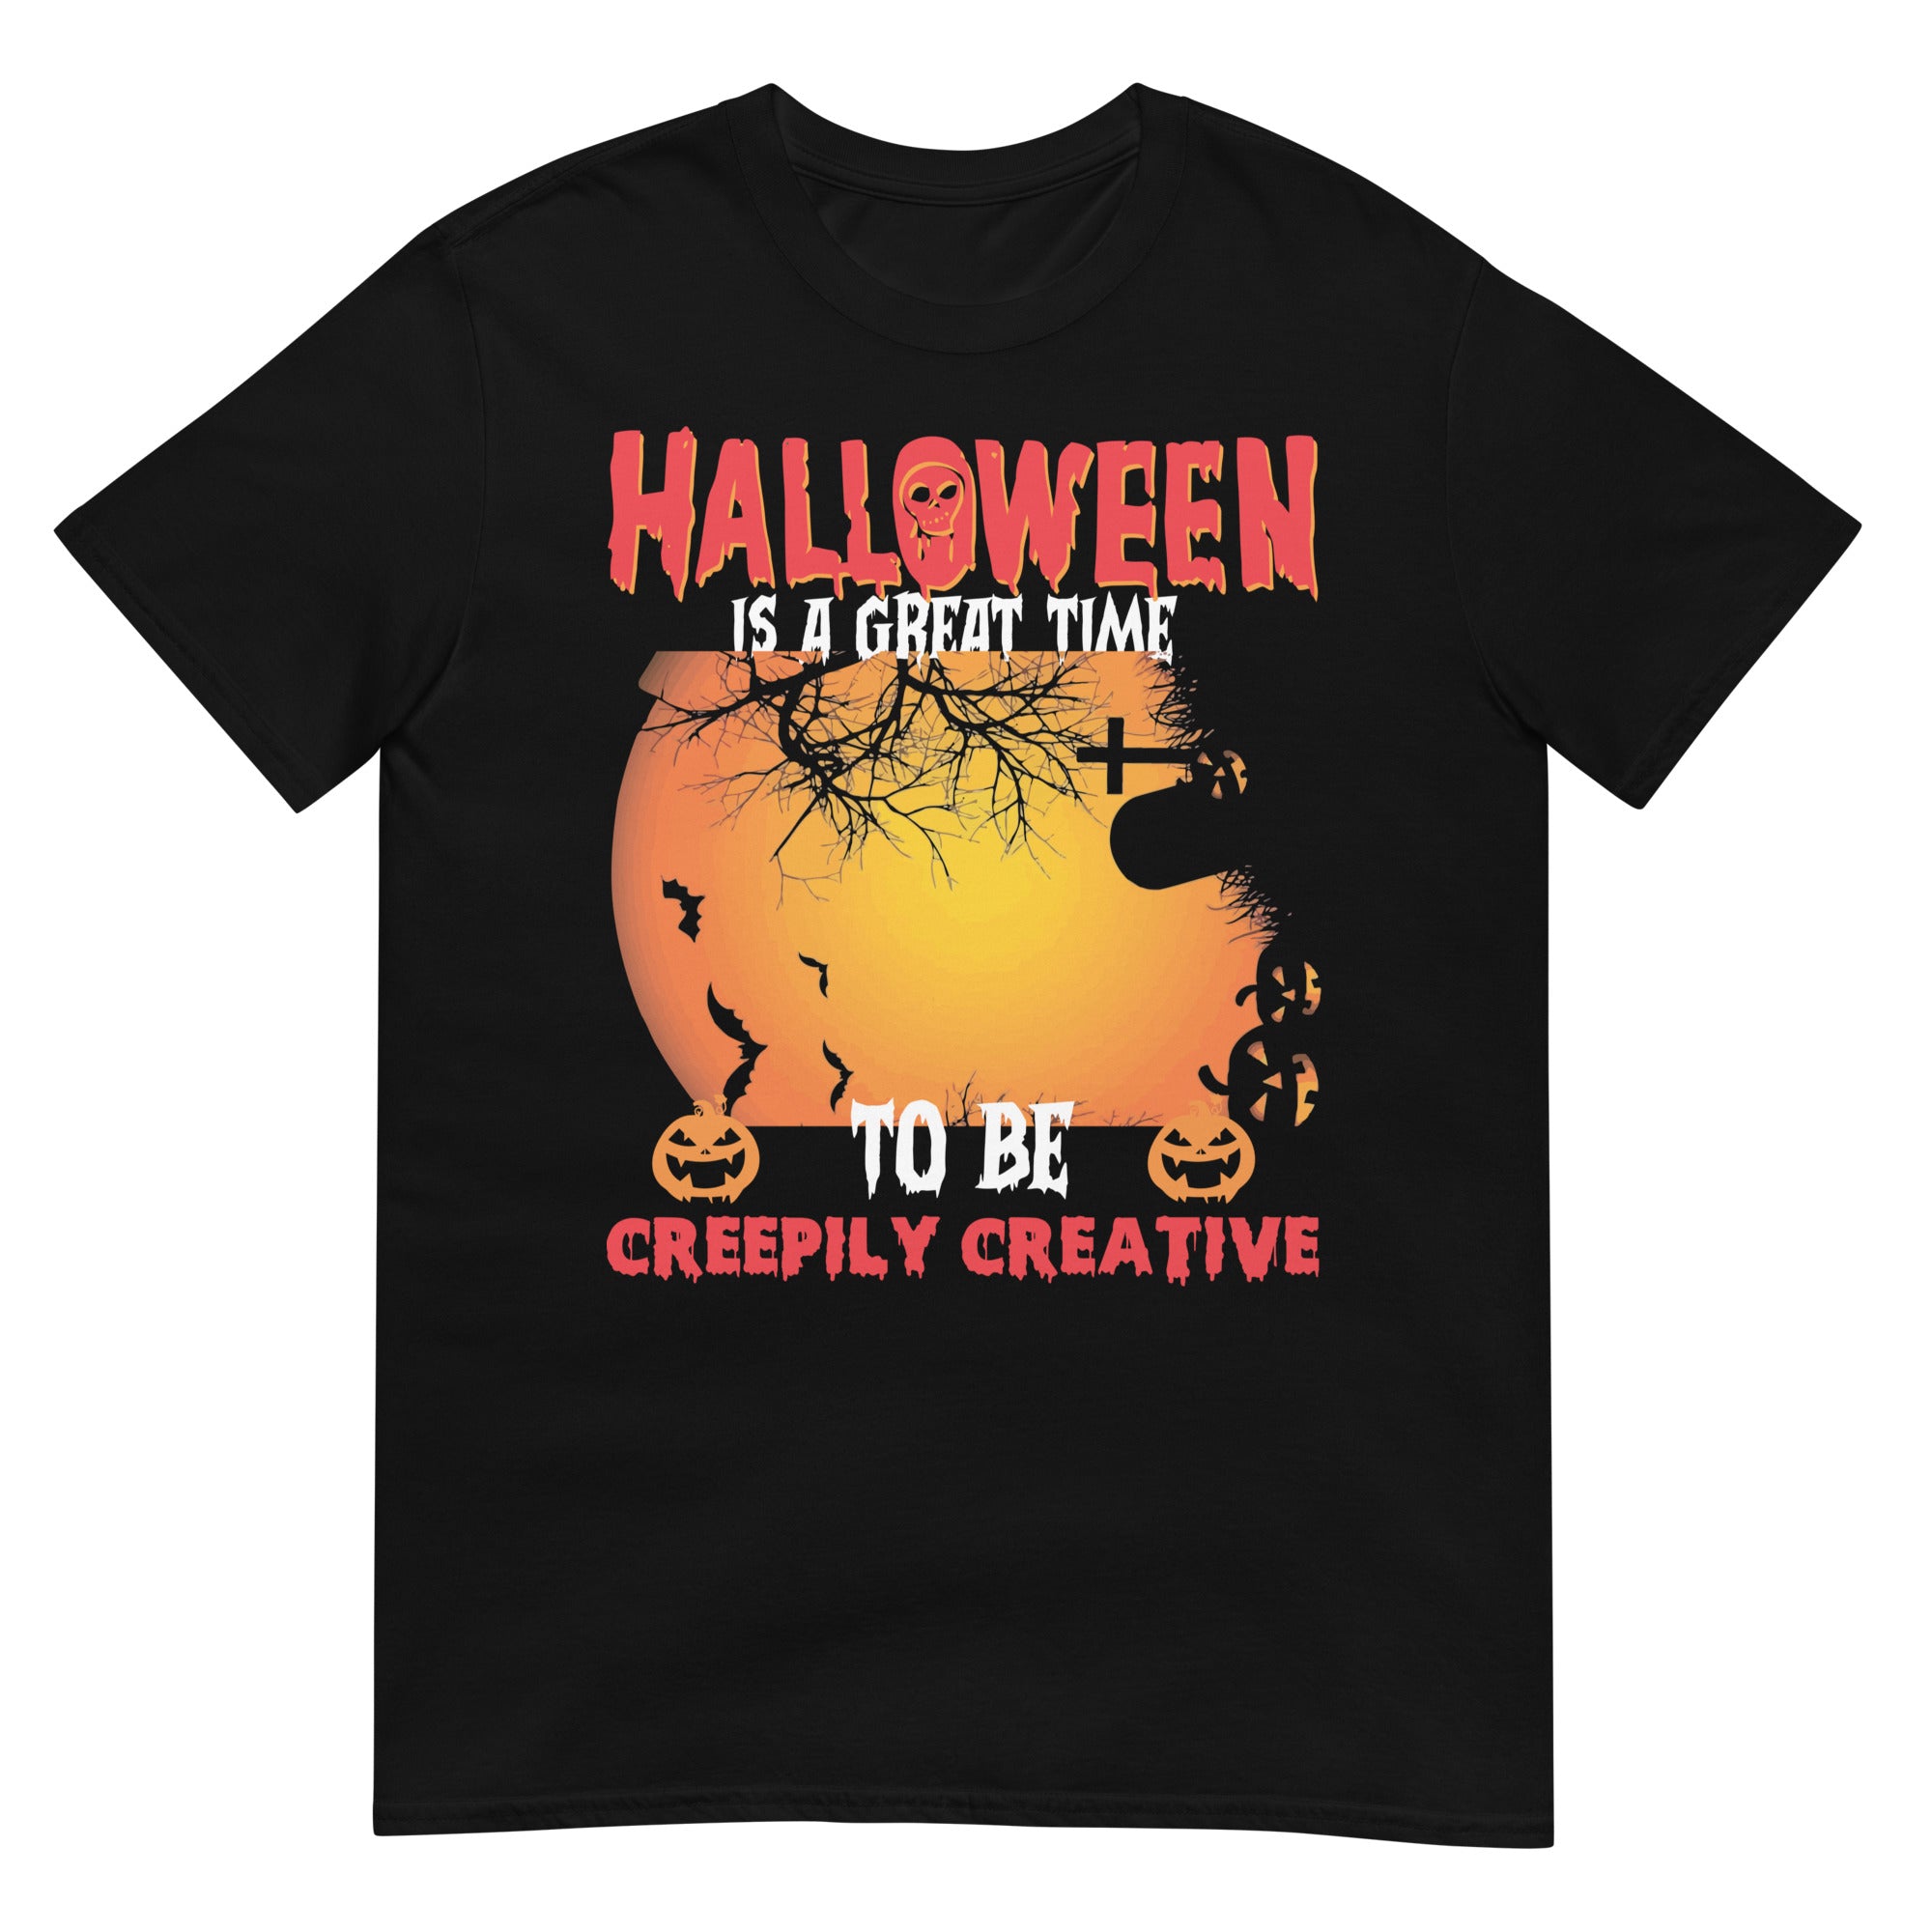 Halloween is A Great Time Short-Sleeve Unisex T-Shirt